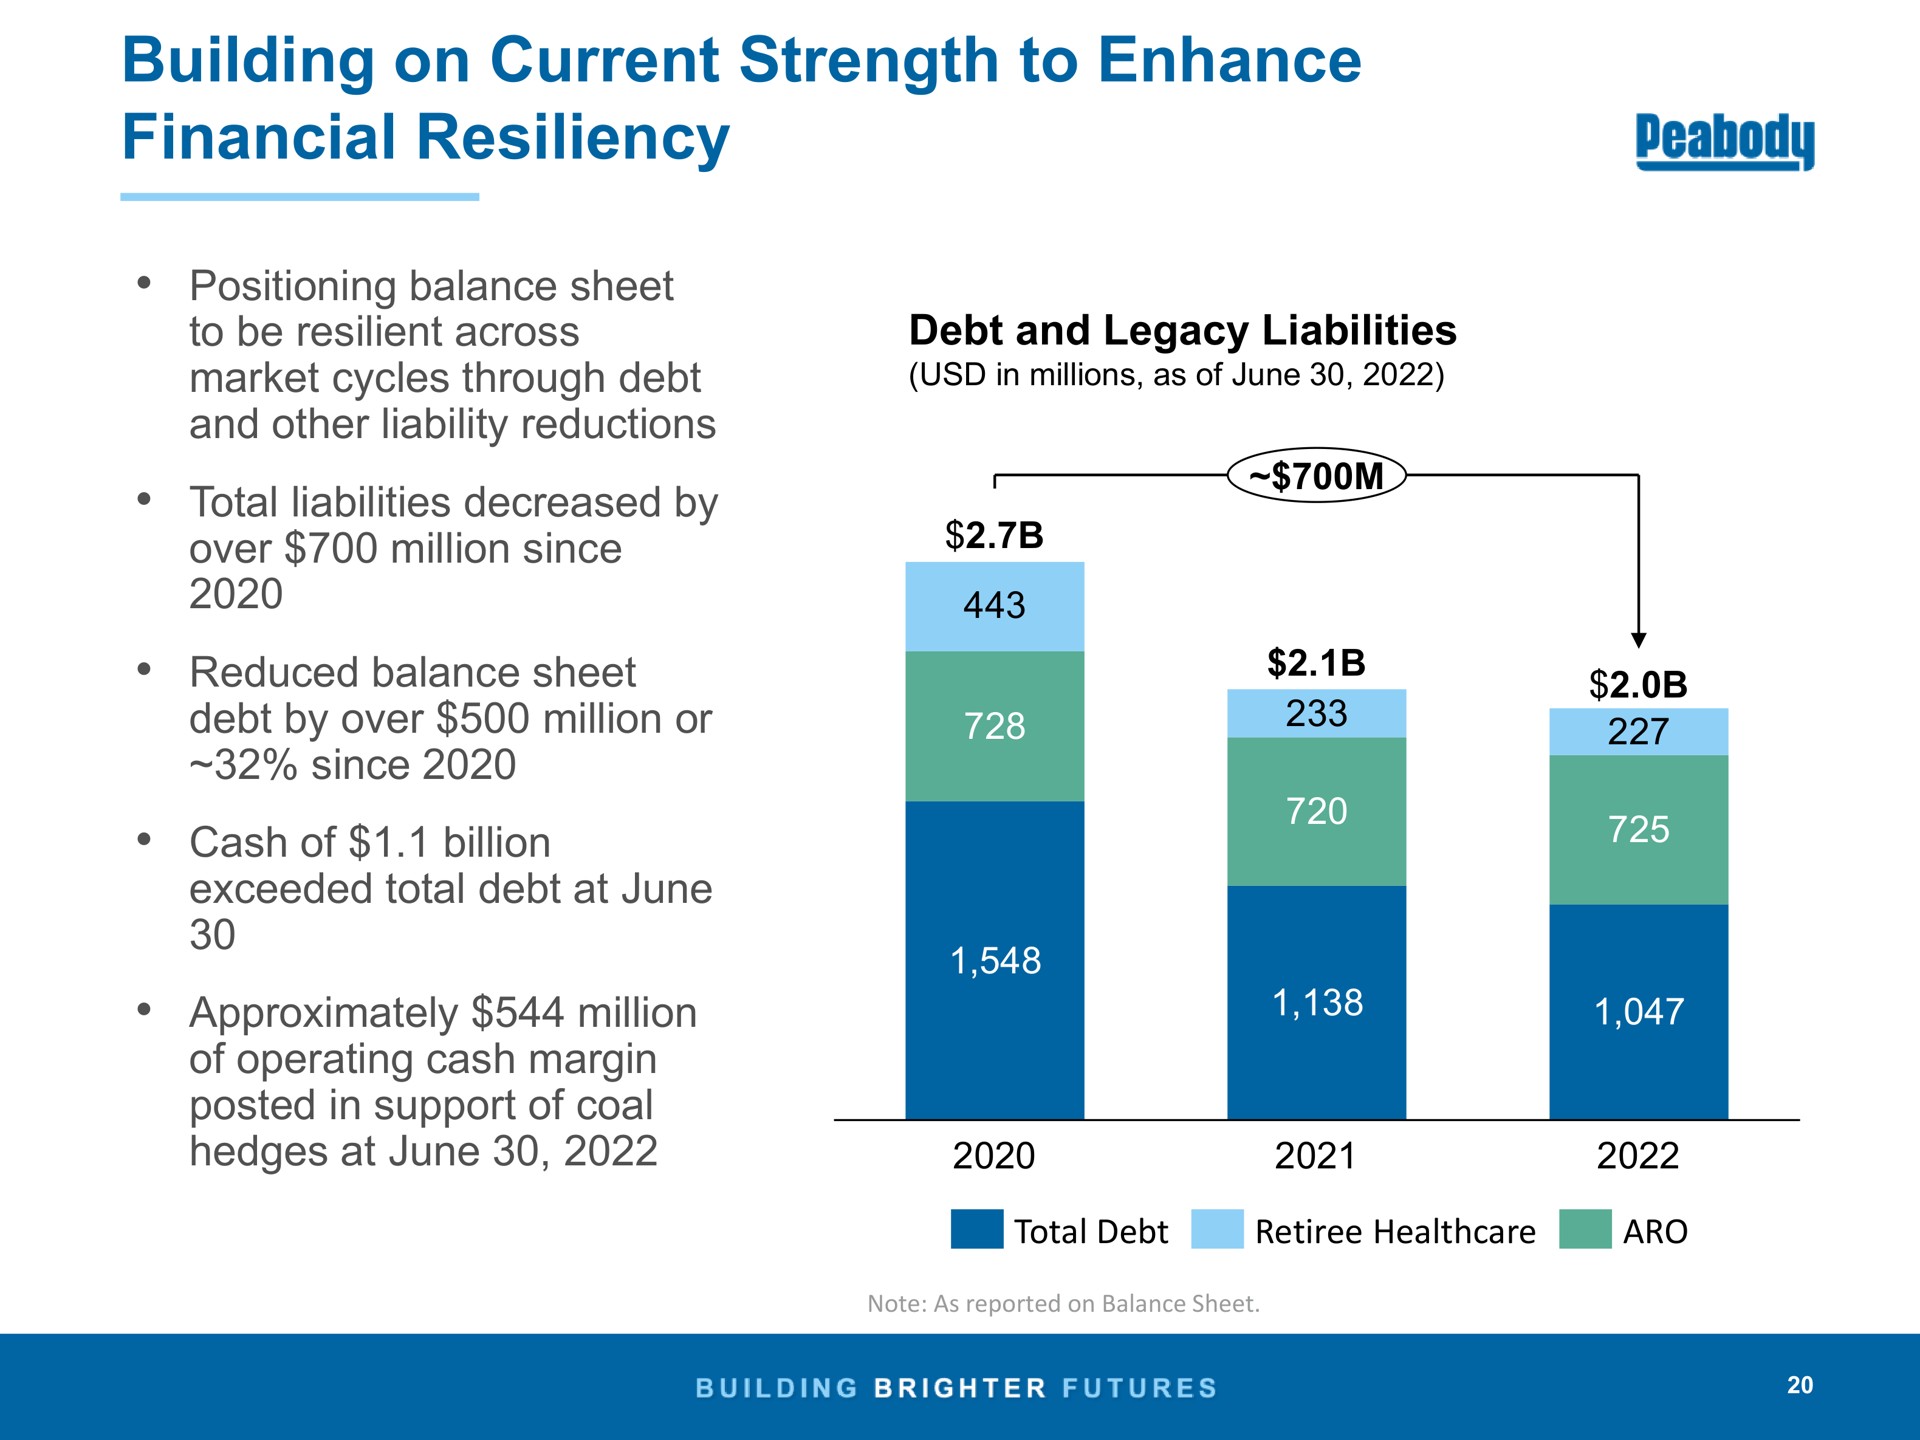 building on current strength to enhance financial resiliency | Peabody Energy